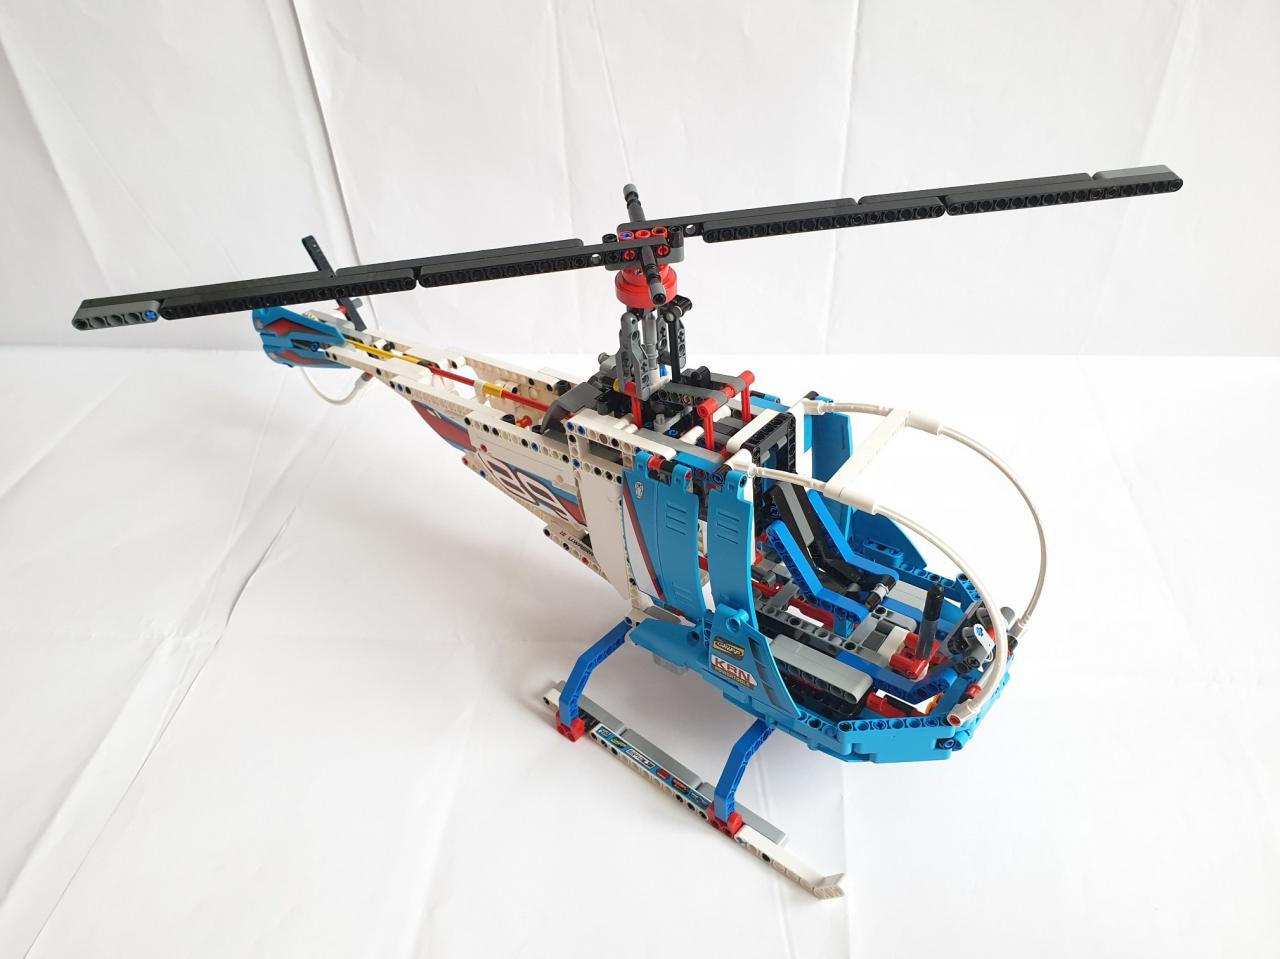 MOC 24128 42077: Nighthawk Helicopter by Tomik